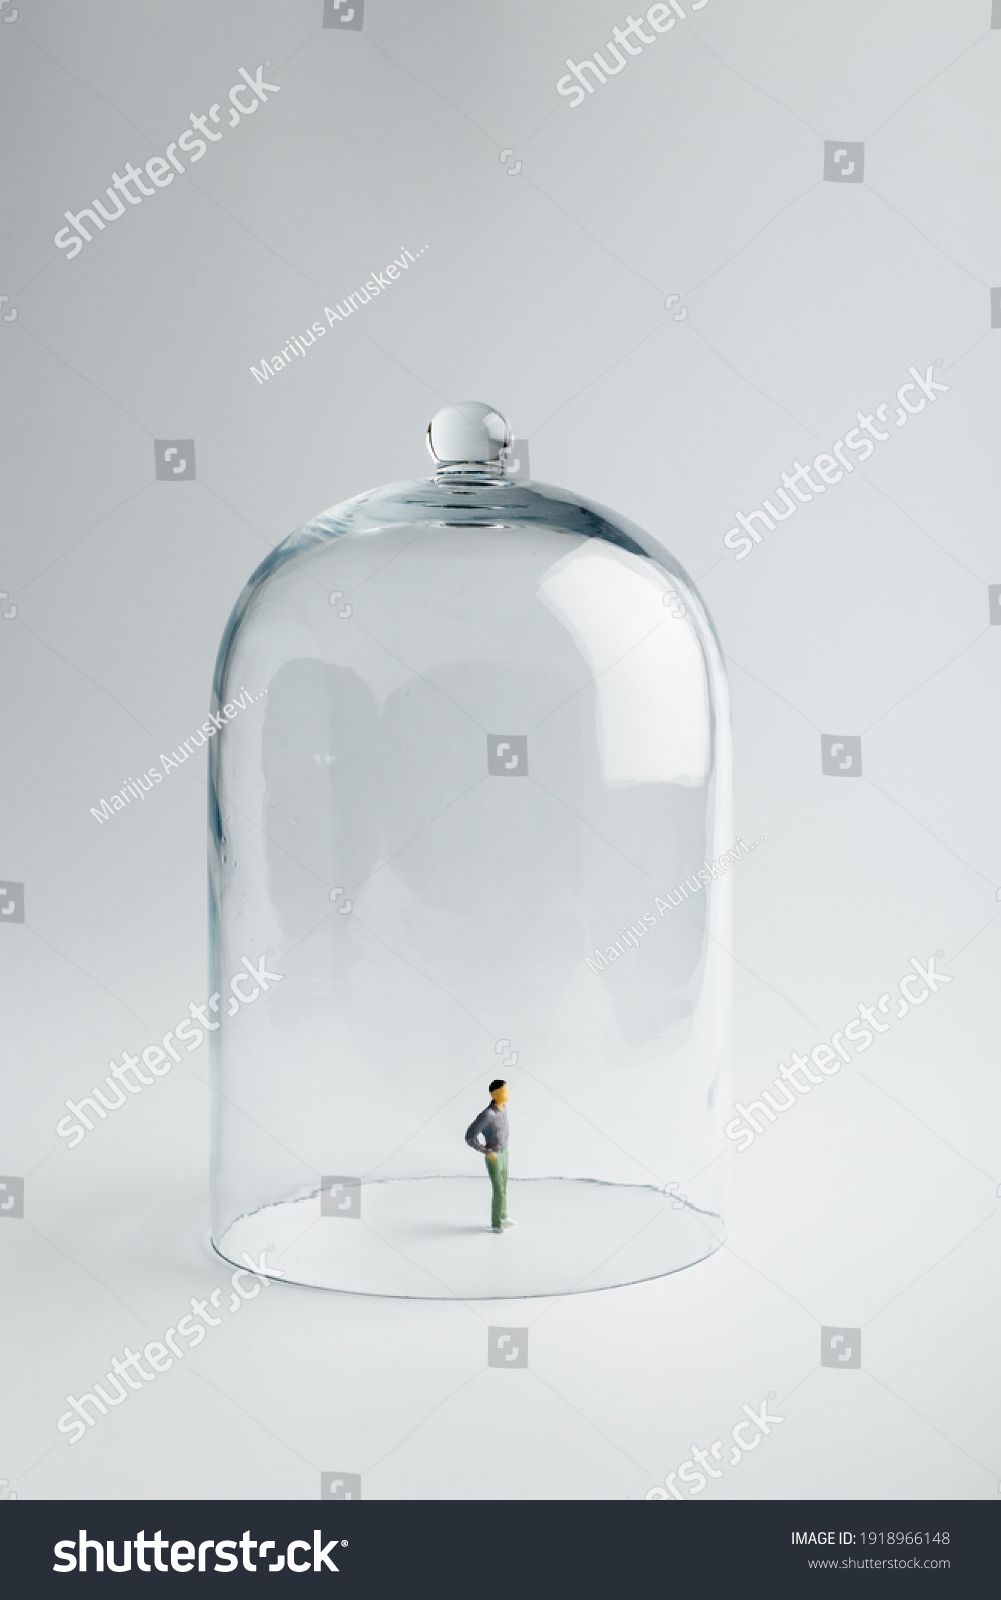 Small figurine in quarantine under a glass dome on a bright background with copy space. Coronavirus prevention, social distancing and Quarantine concept. Self-isolation. #1918966148